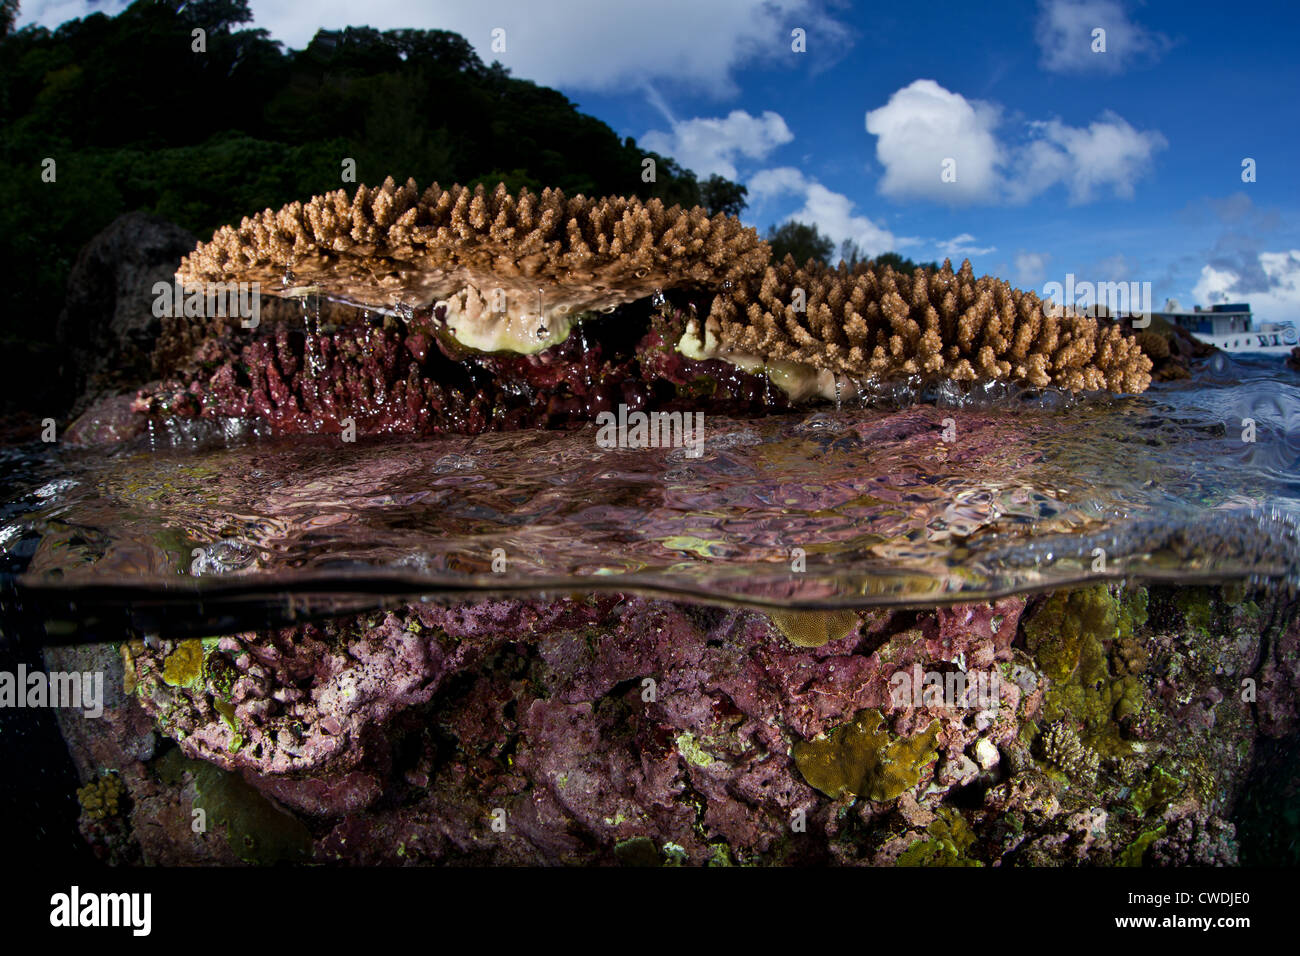 Seawater drips from small table corals, Acropora sp., that have been exposed to air during an extreme low tide. Stock Photo